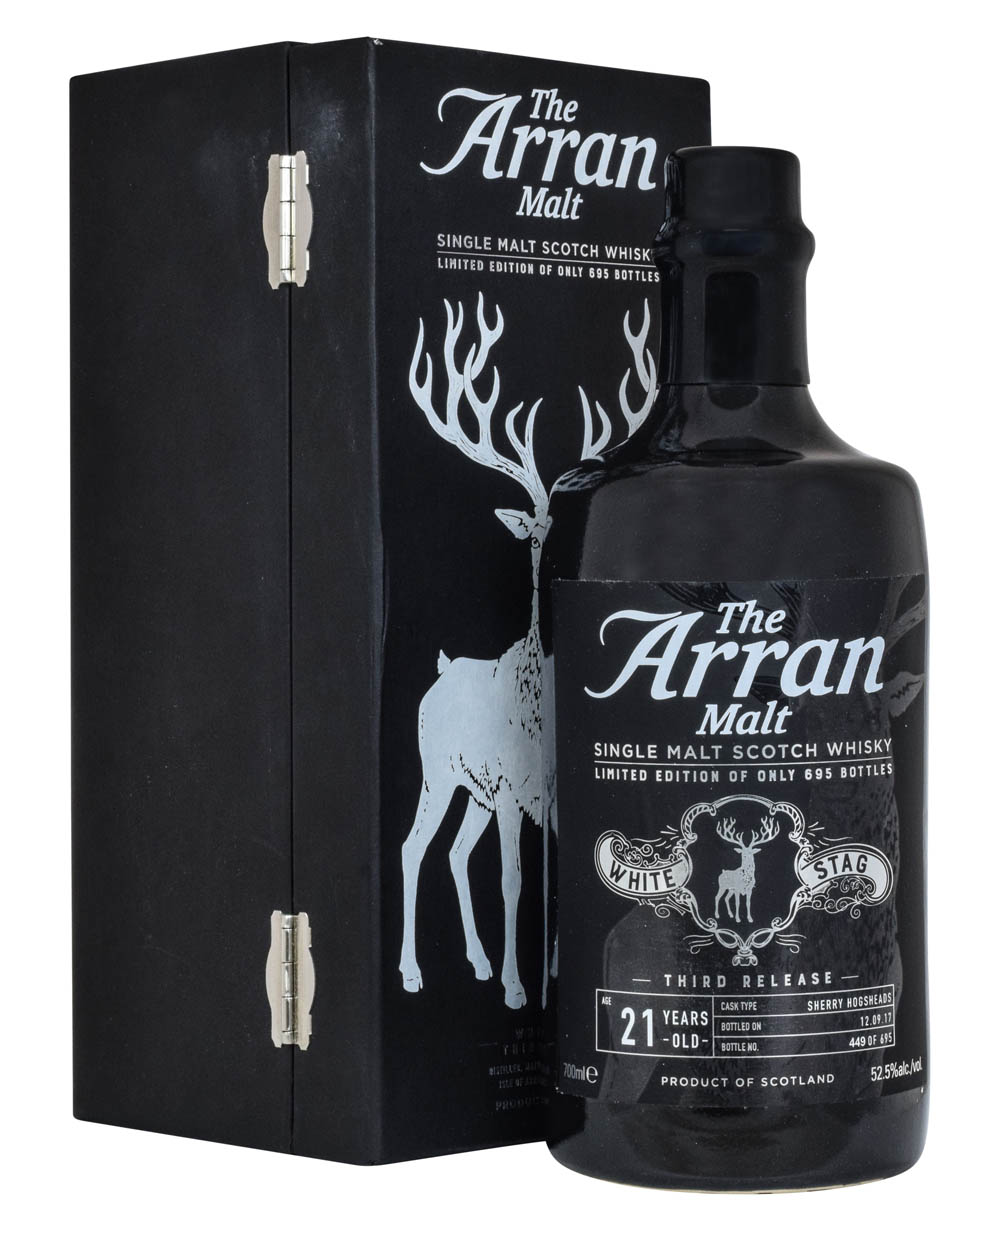 Arran White Stag Third Release Box Musthave Malts MHM